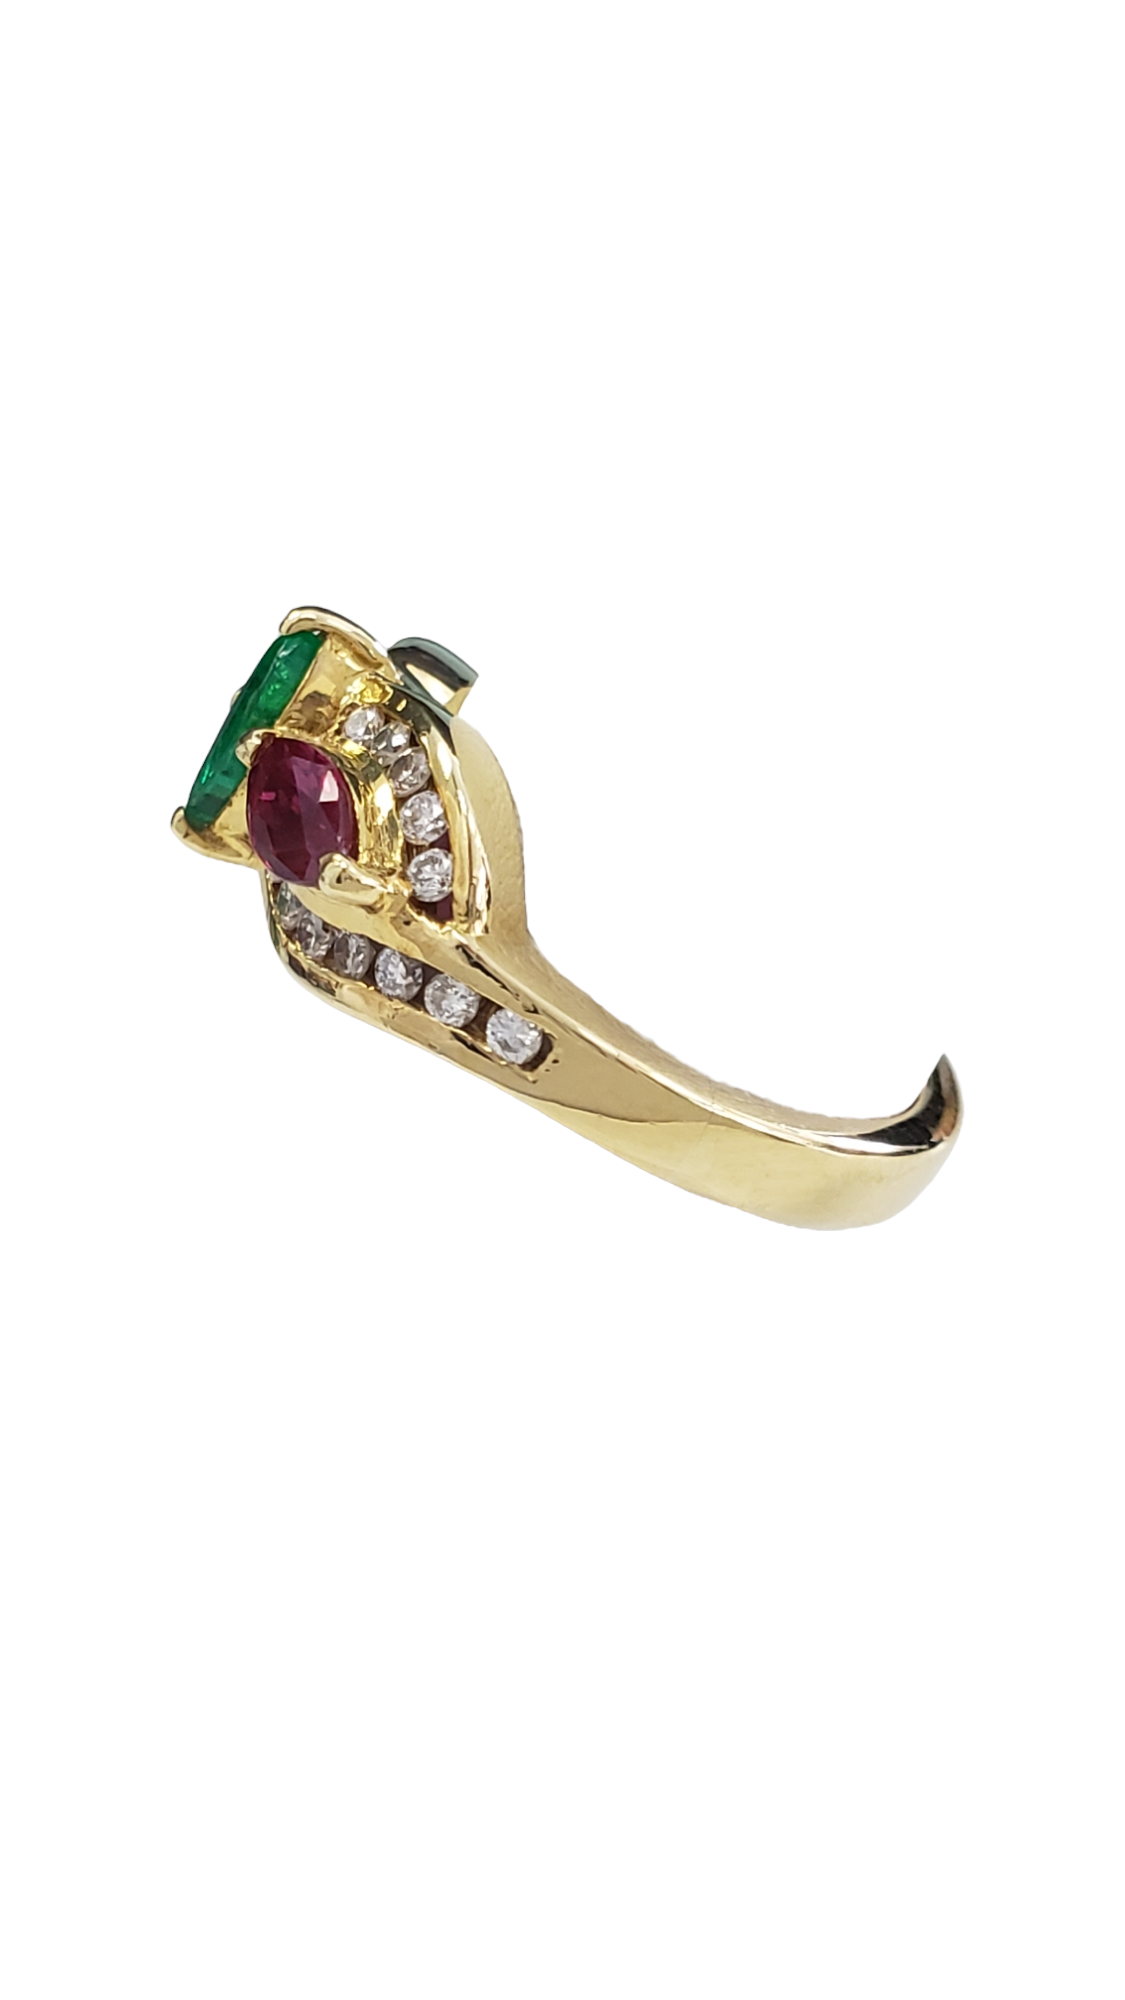 18K Yellow Gold Emerald, Ruby, Sapphire and Diamond Women's Ring Preowned